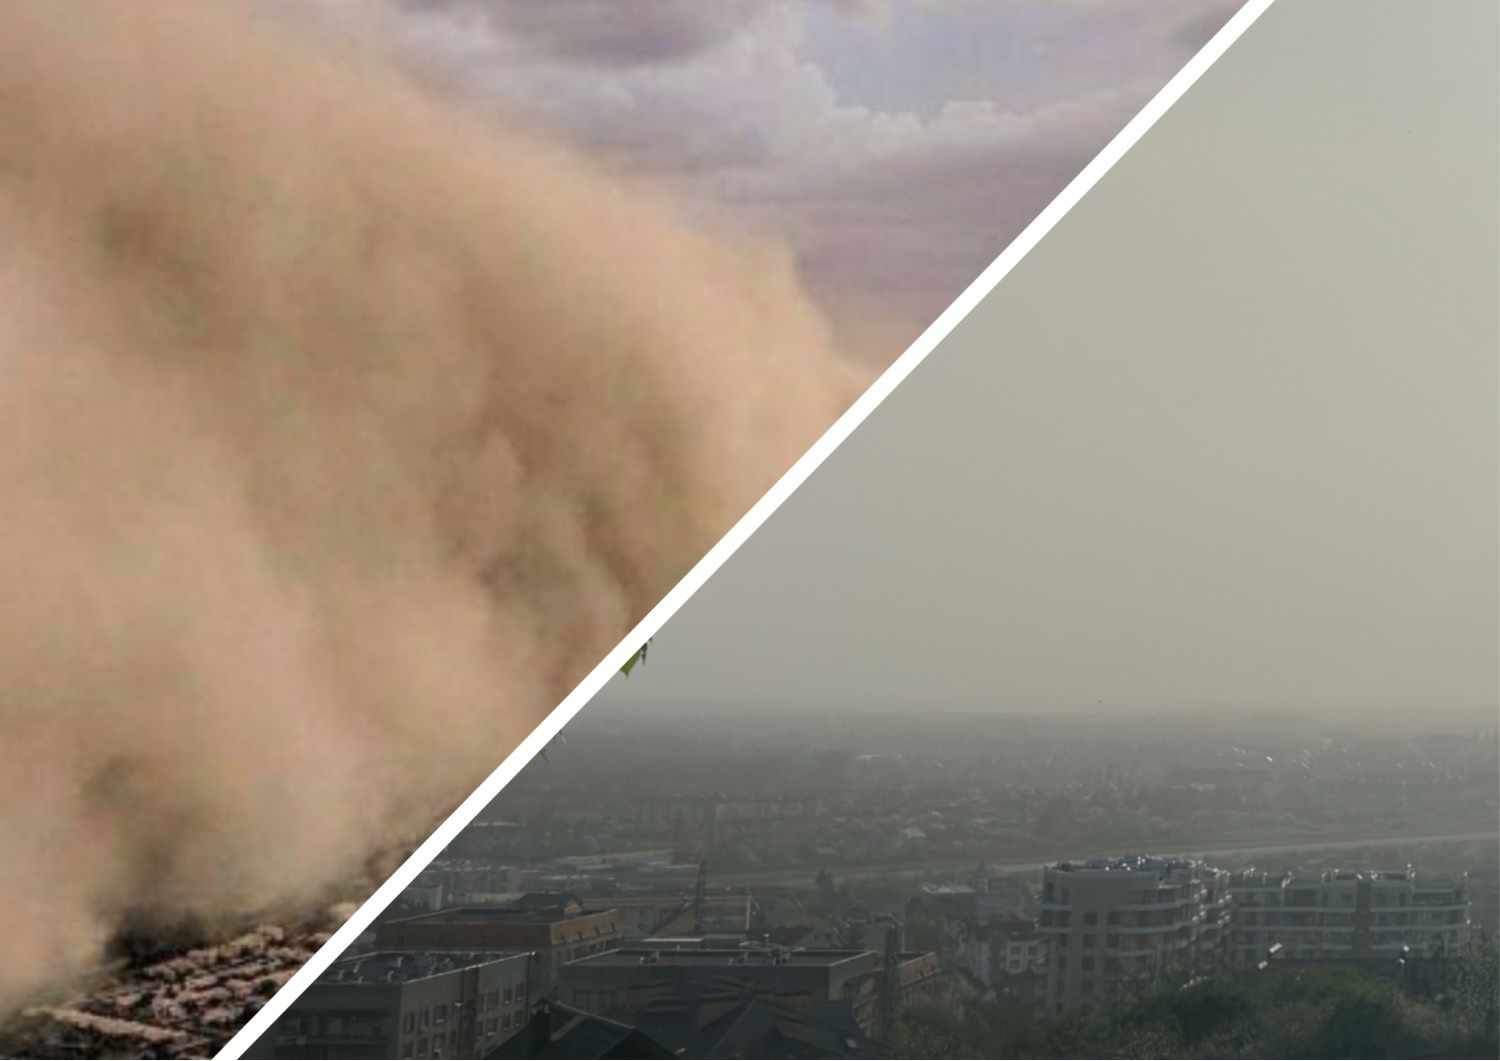 An unusual dust storm was observed in the region.